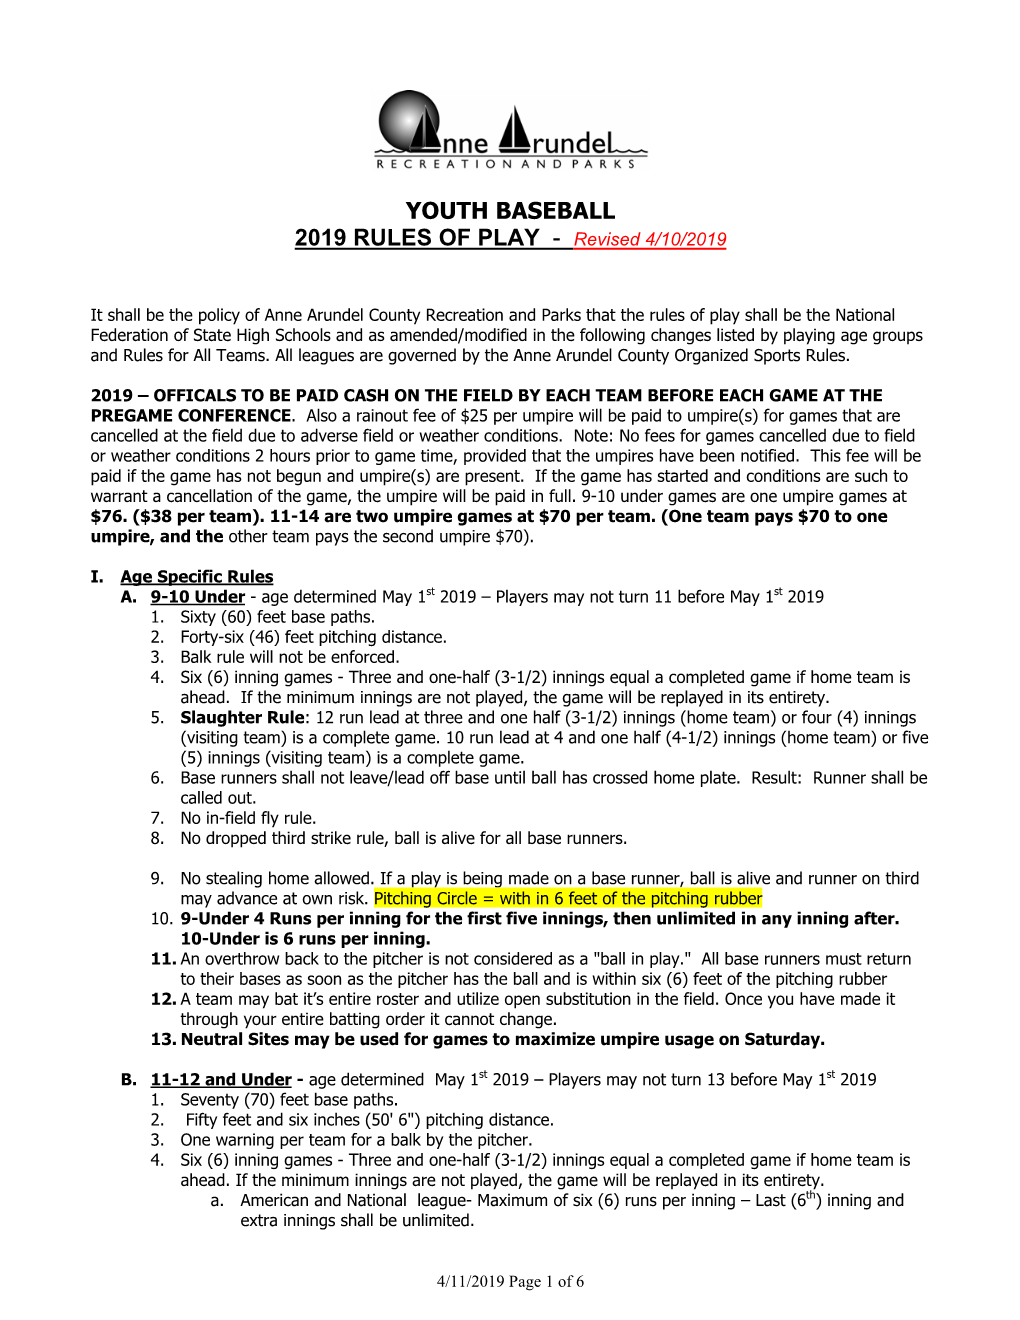 YOUTH BASEBALL 2019 RULES of PLAY - Revised 4/10/2019